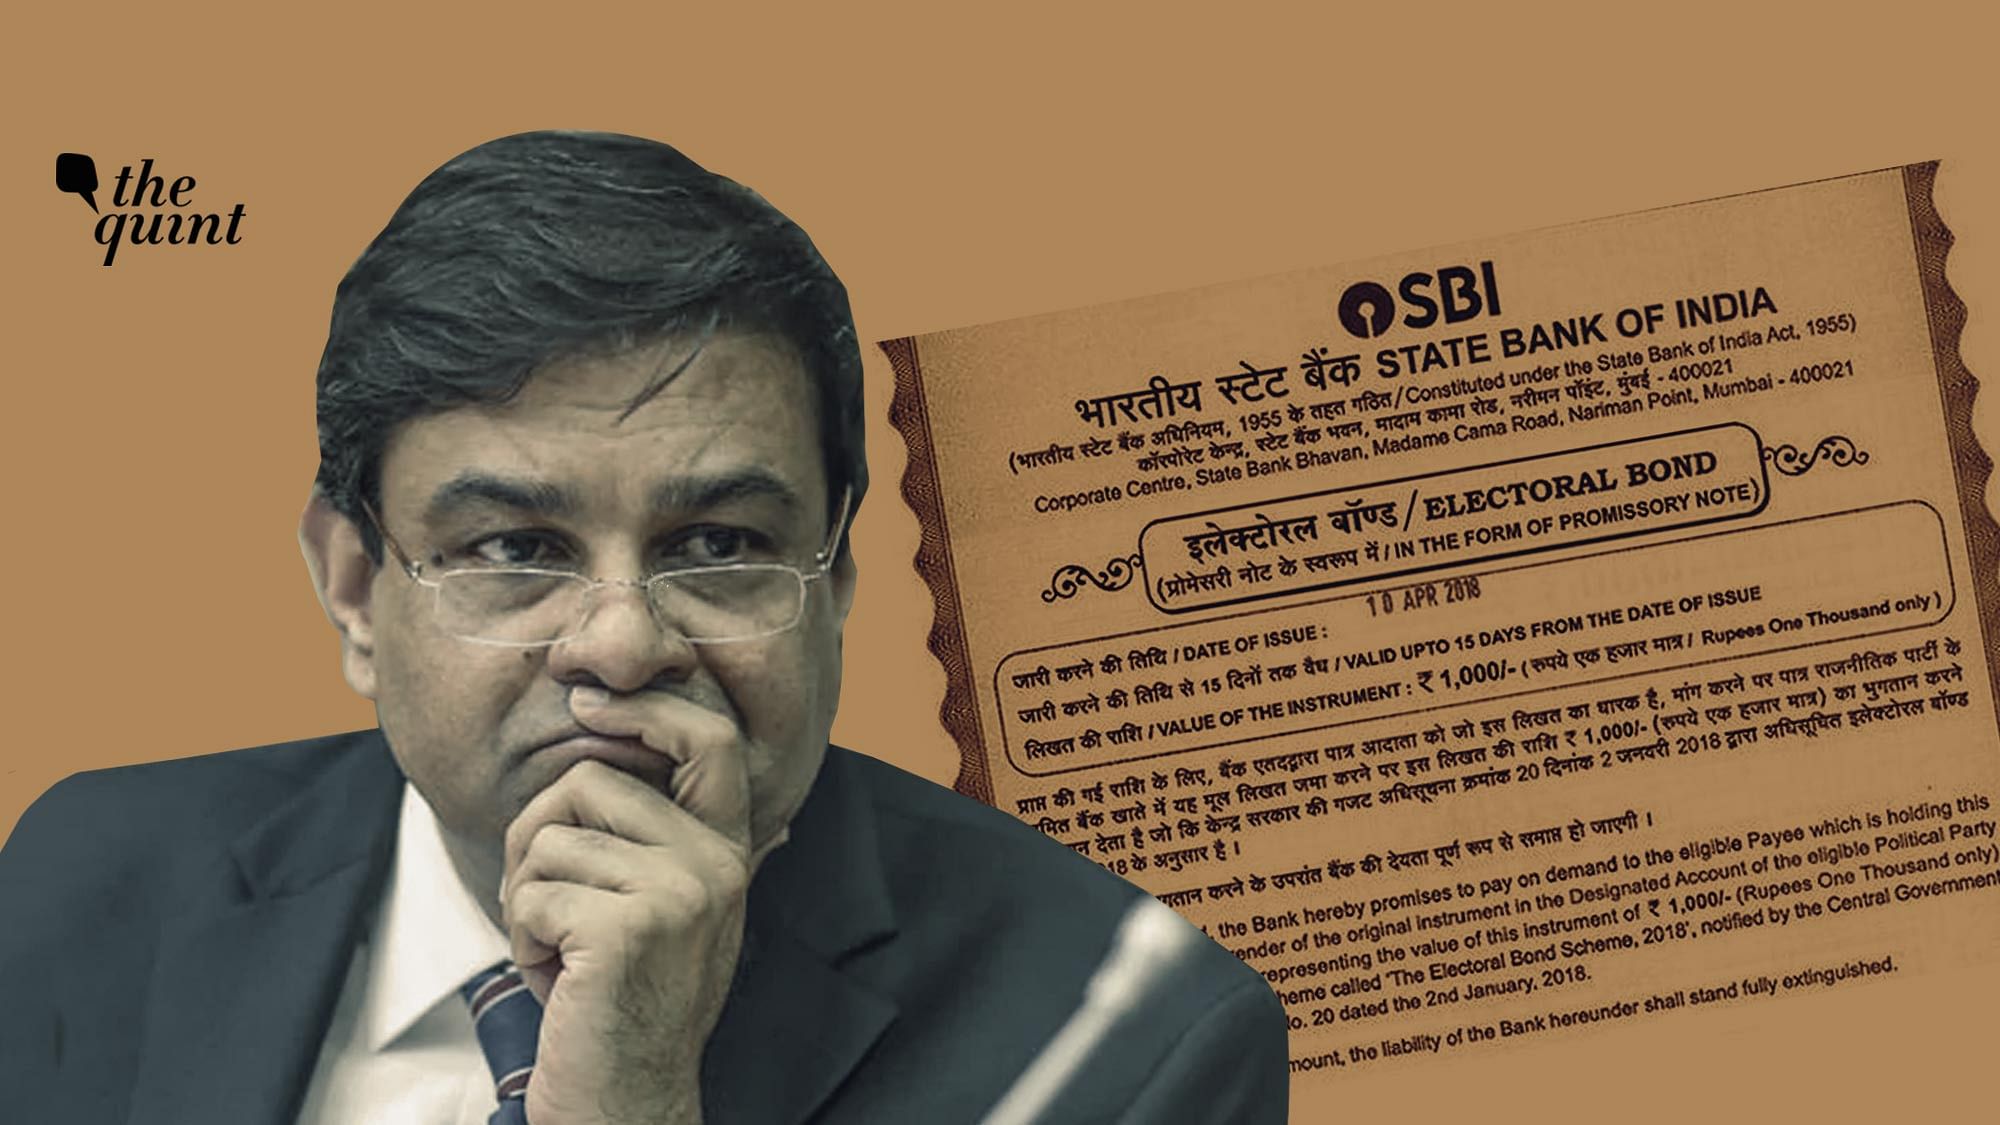 Electoral Bonds: Then RBI Governor Urjit Patel strongly objected, in letters, on issuing electoral bonds in physical form as it would carry the danger of money laundering and forgery. But, Finance Minister Arun Jaitely paid no heed to Patel’s concerns.&nbsp;